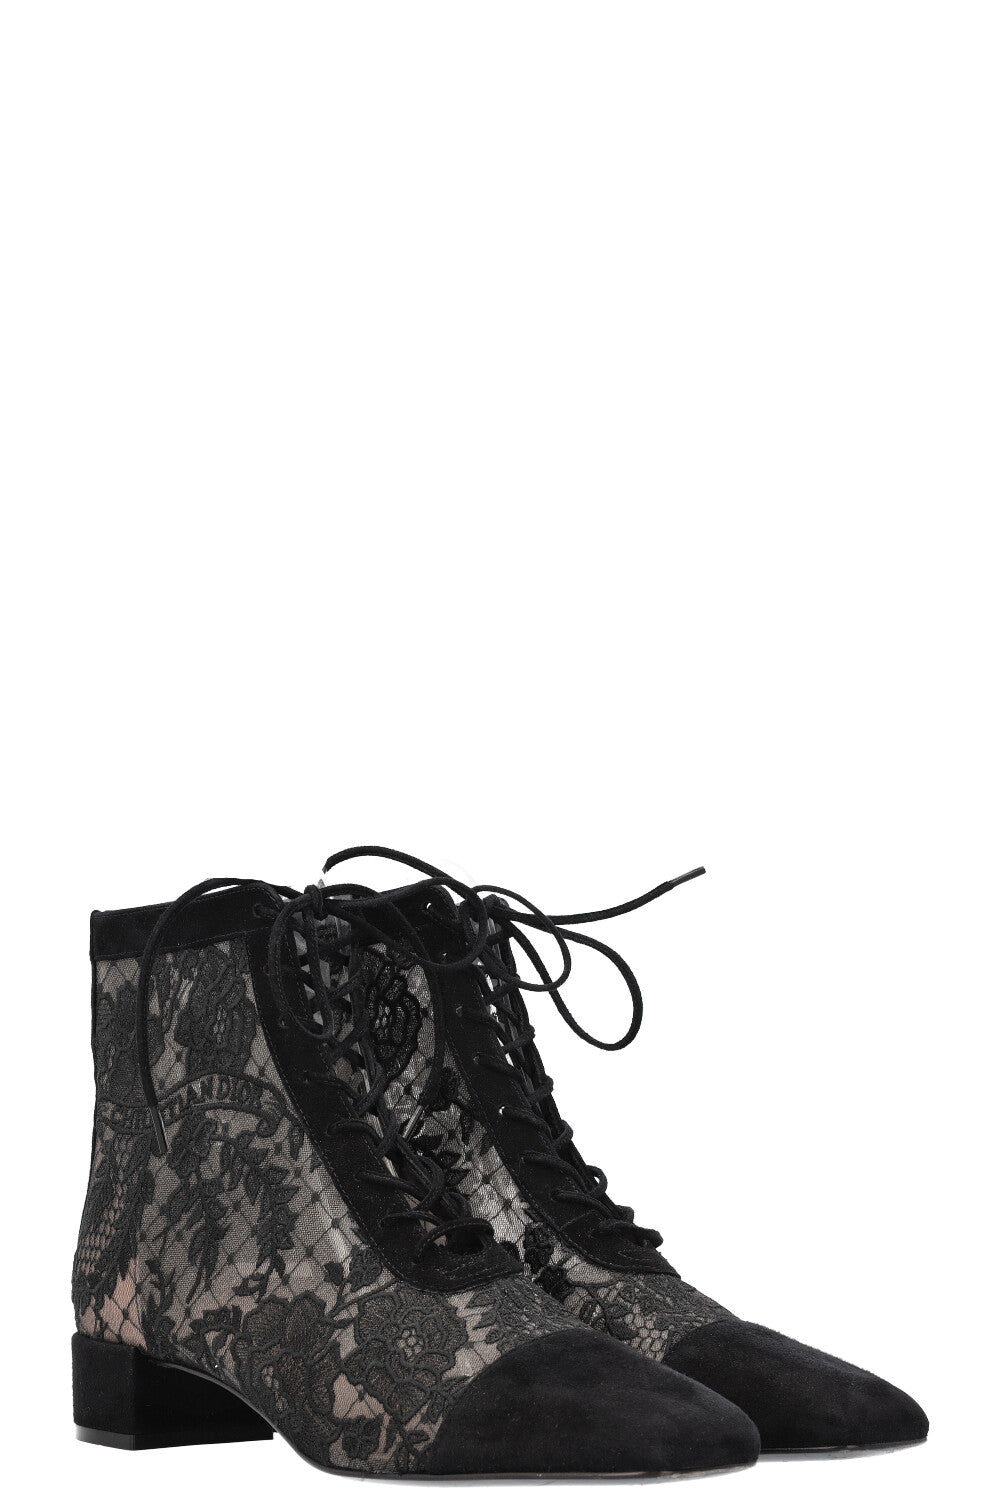 CHRISTIAN DIOR Naughtily-D Boots Lace Black